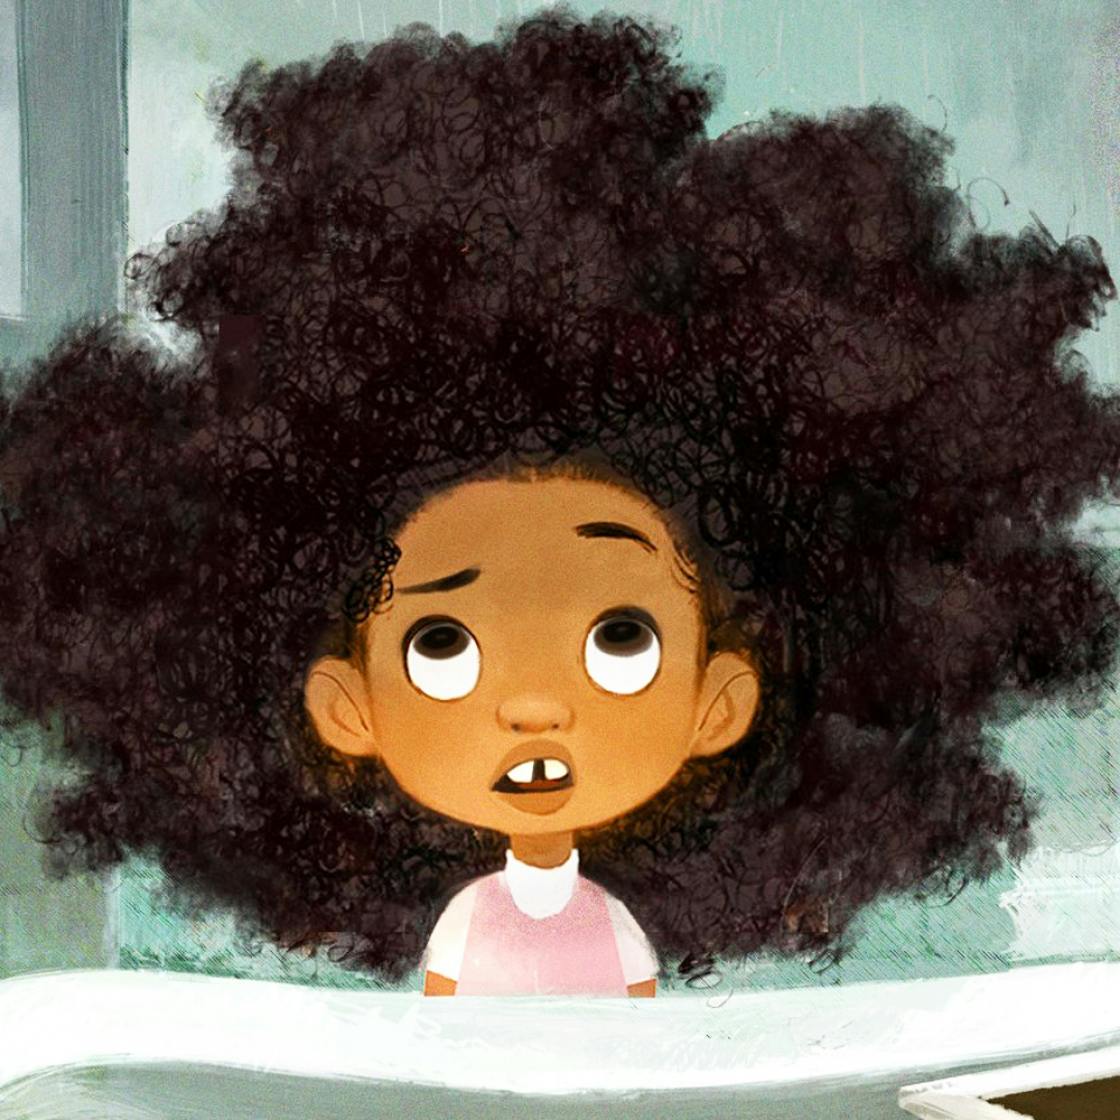 Short film Hair Love is important afro and black representation